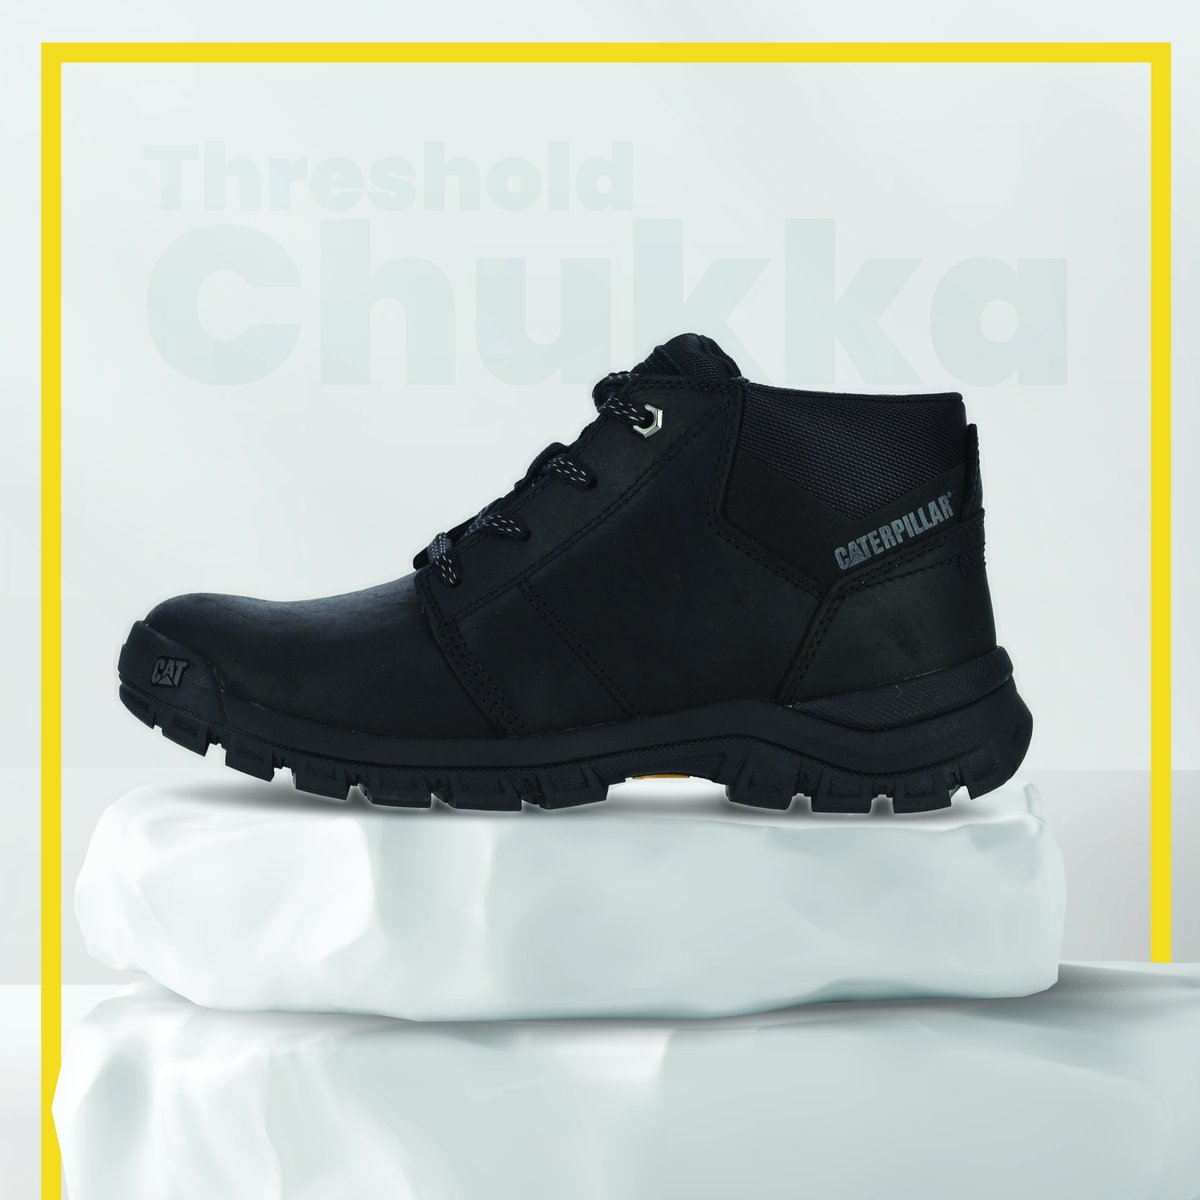 Rugged style and unstoppable, step boldly into any terrain with the Cat Threshold Chukka boots.

R2,199.99
#Catfootwearsa